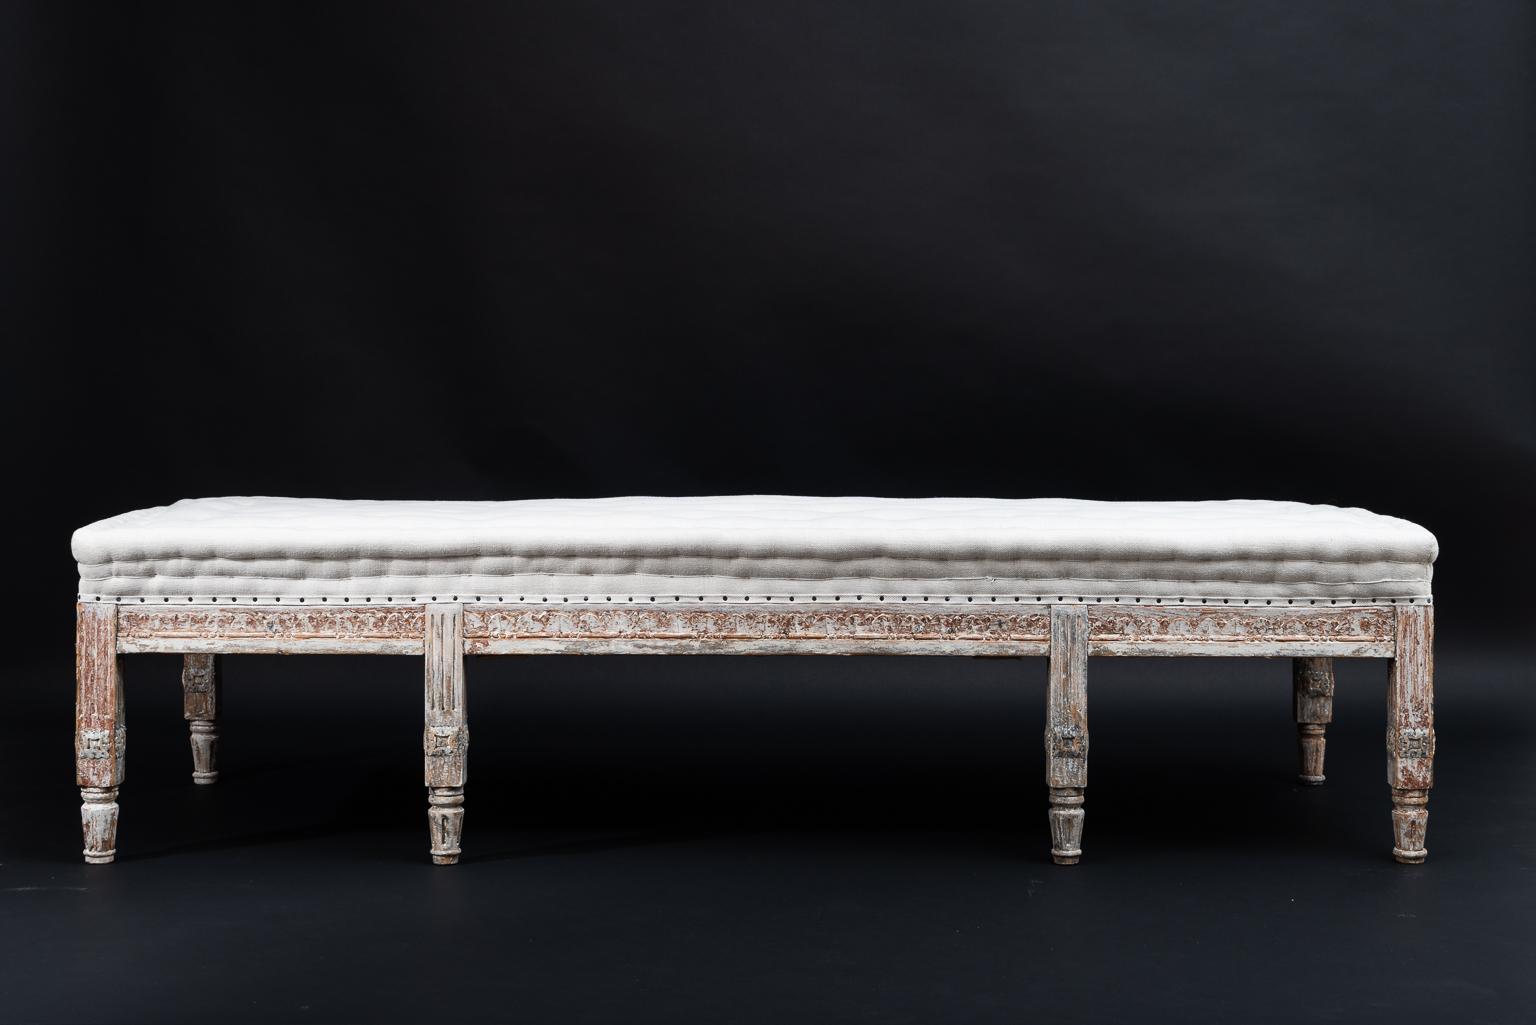 Swedish gustavian bench from the late 1700s. Rustic dry scraped surface with traces of the original paint from the late 1700s. Rich wooden carvings with classic gustavian decor on three sides. The back is not decorated because it is meant to stand